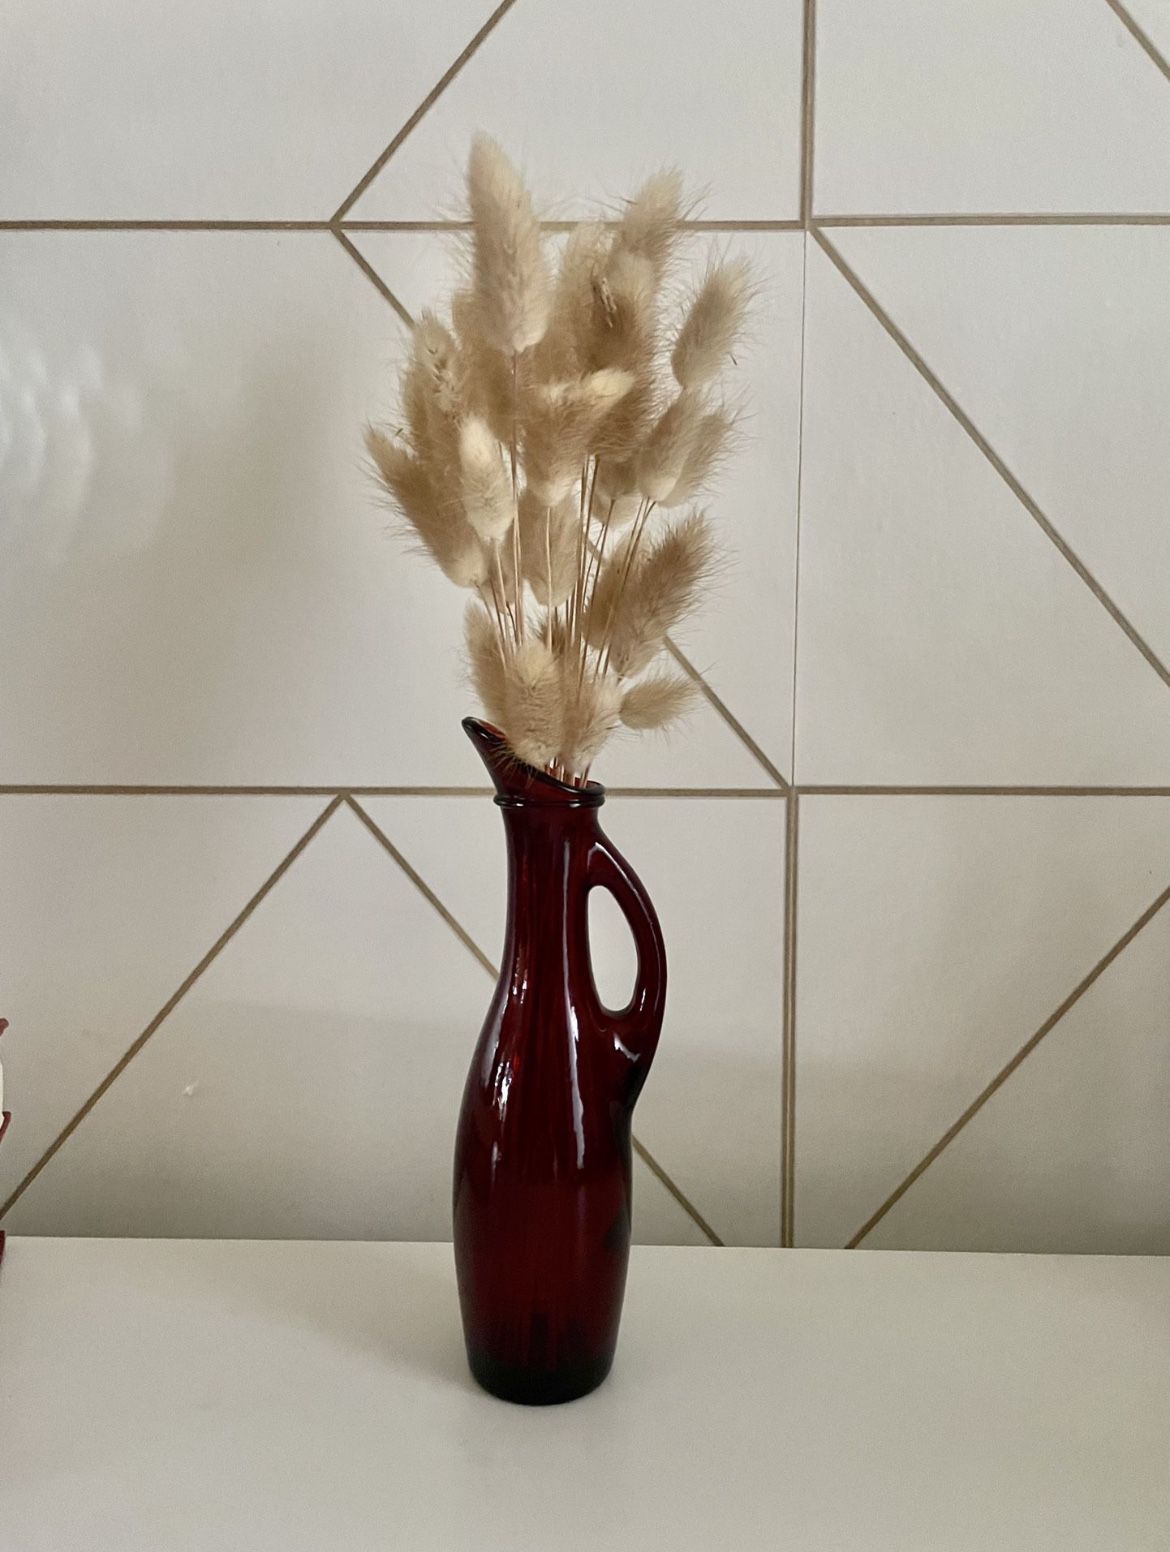 Vintage Avon Red 8” Glass Vase w/ Dried Bunny Tails Pampas - Dried Flowers